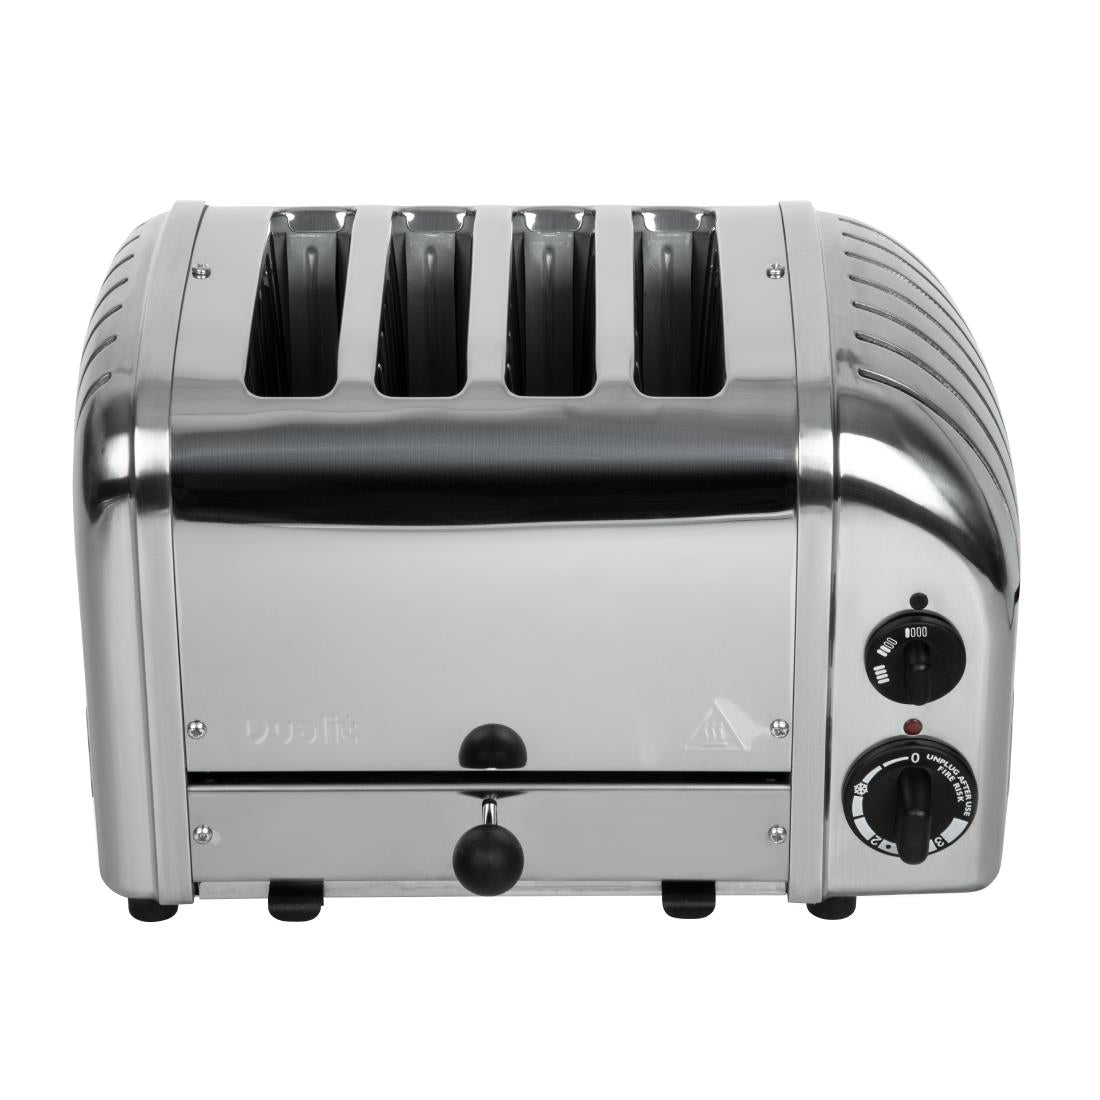 Dualit 2 x 2 Combi Vario 4 Slice Toaster Stainless 42174 JD Catering Equipment Solutions Ltd